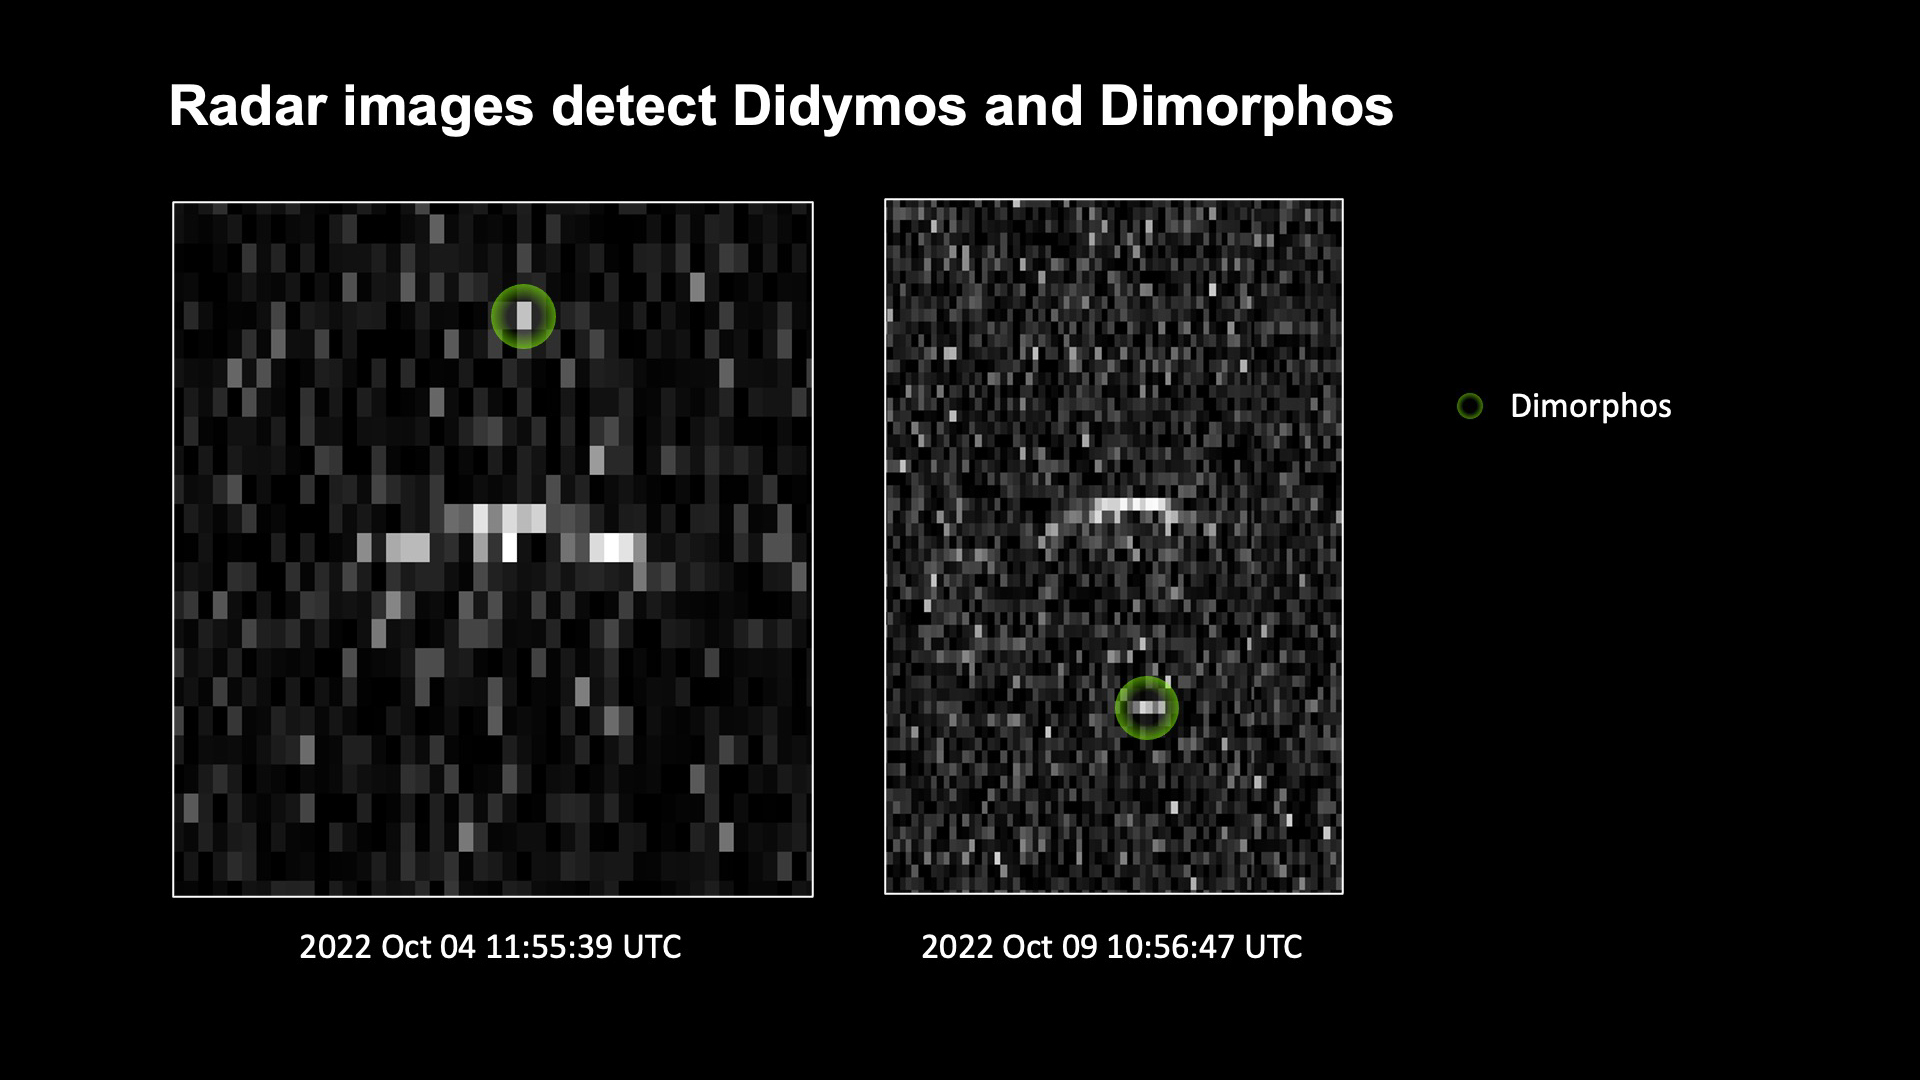 The green circle shows the location of the Dimorphos asteroid, which orbits the larger asteroid, Didymos